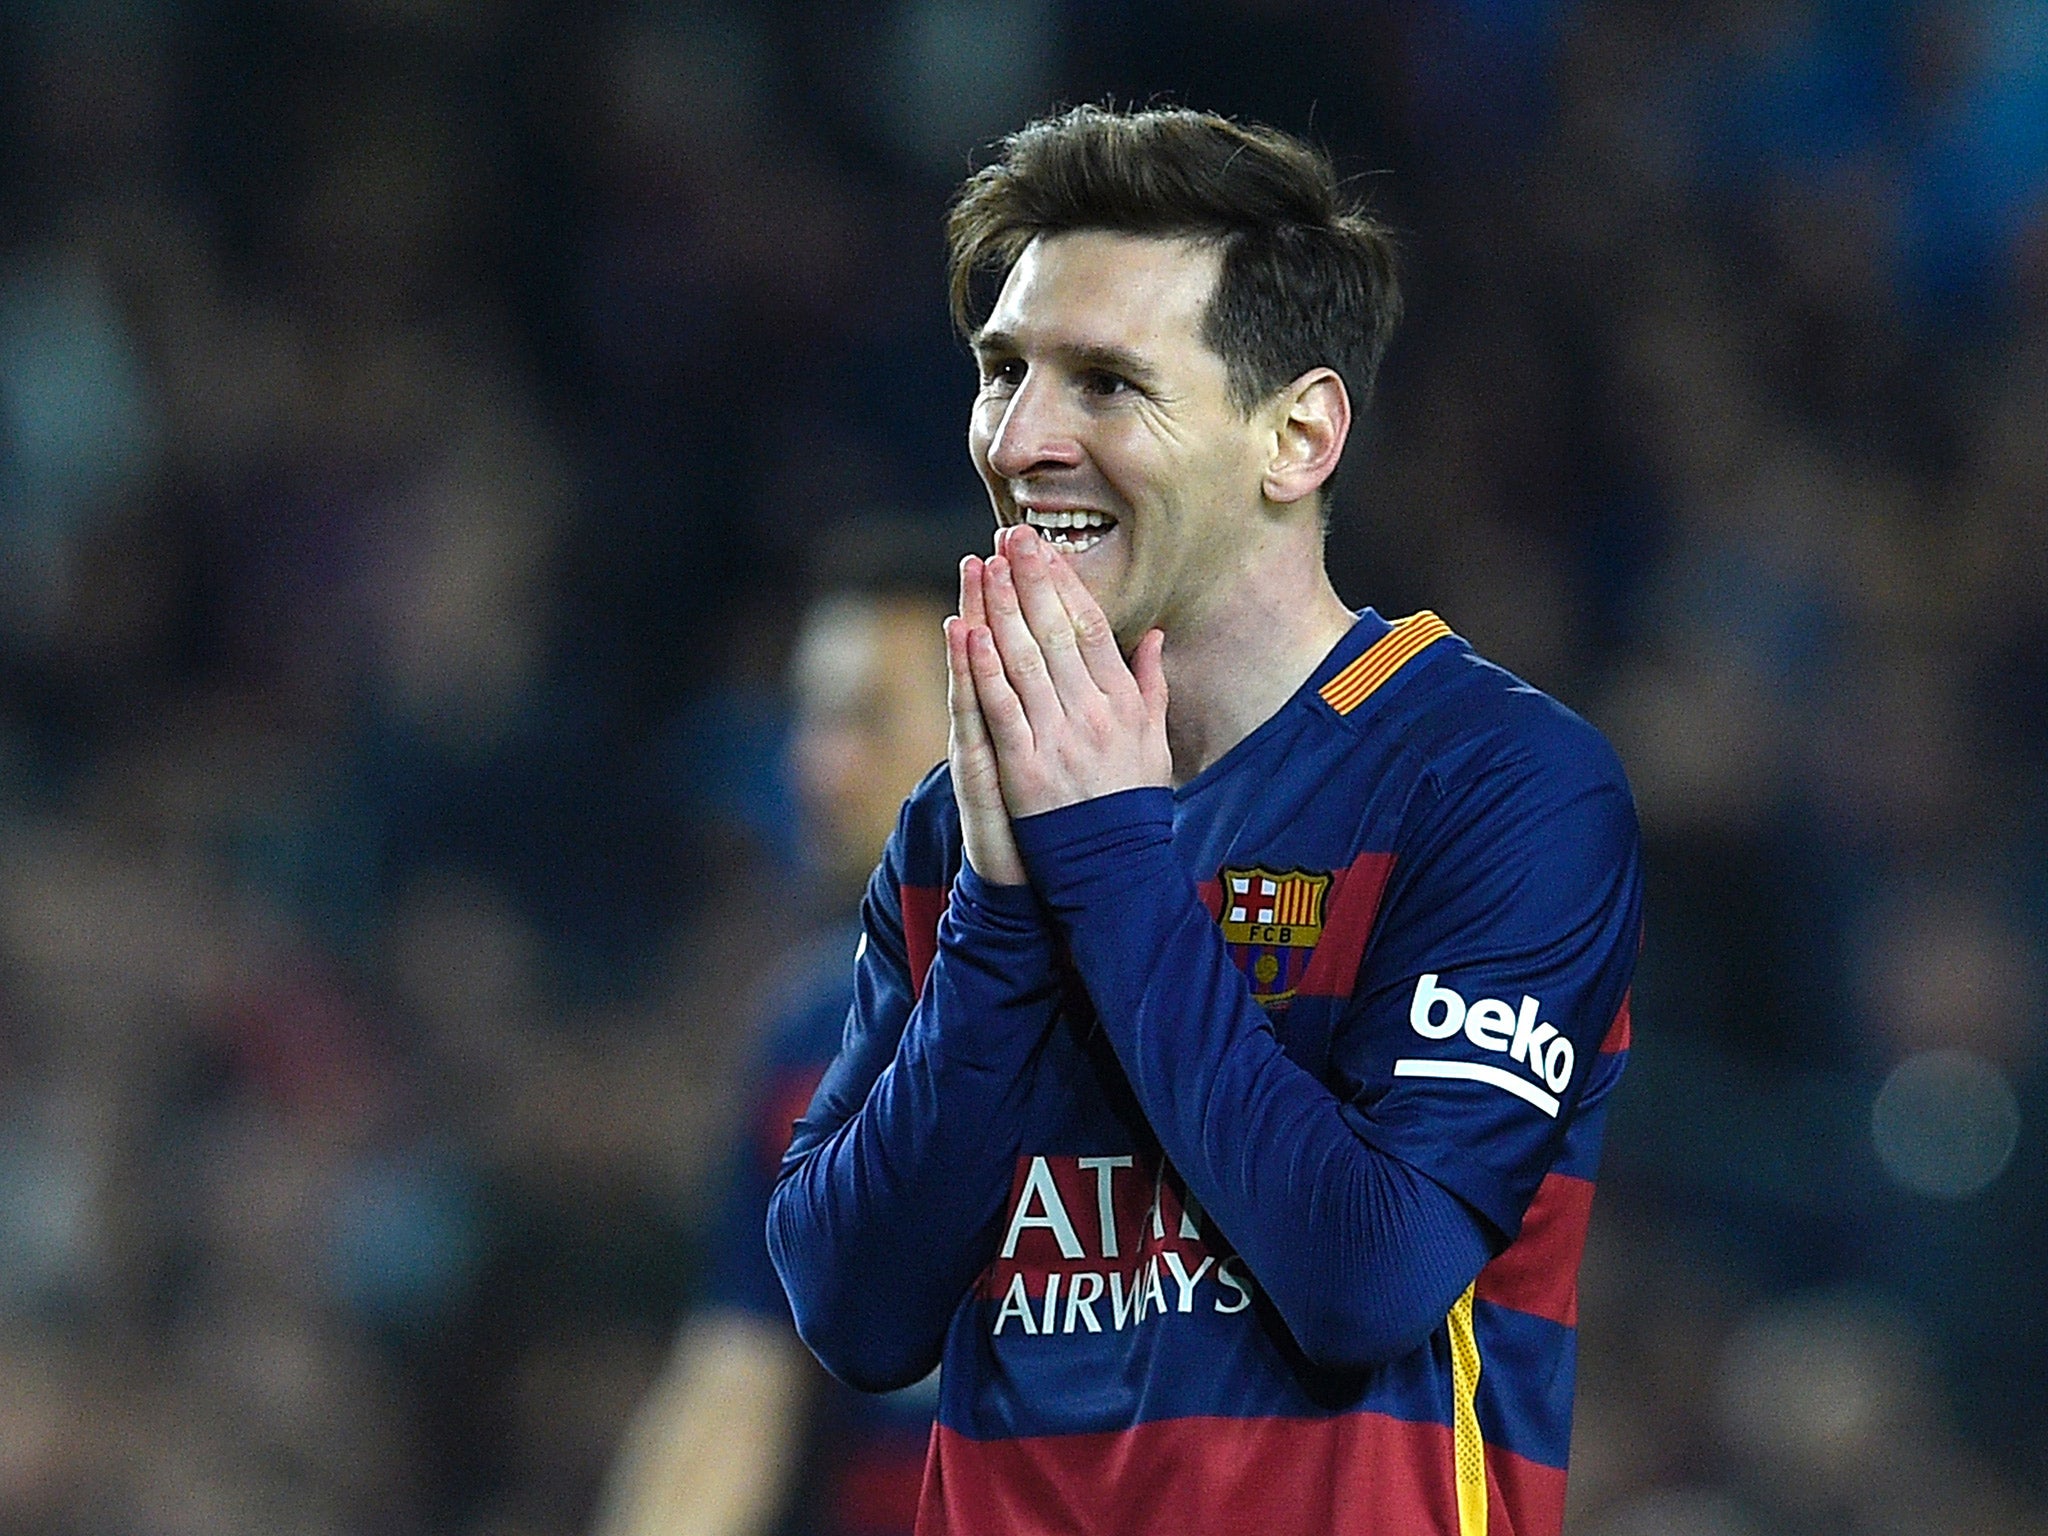 Lionel Messi has admitted Barcelona do not want Real Madrid to win the Champions League